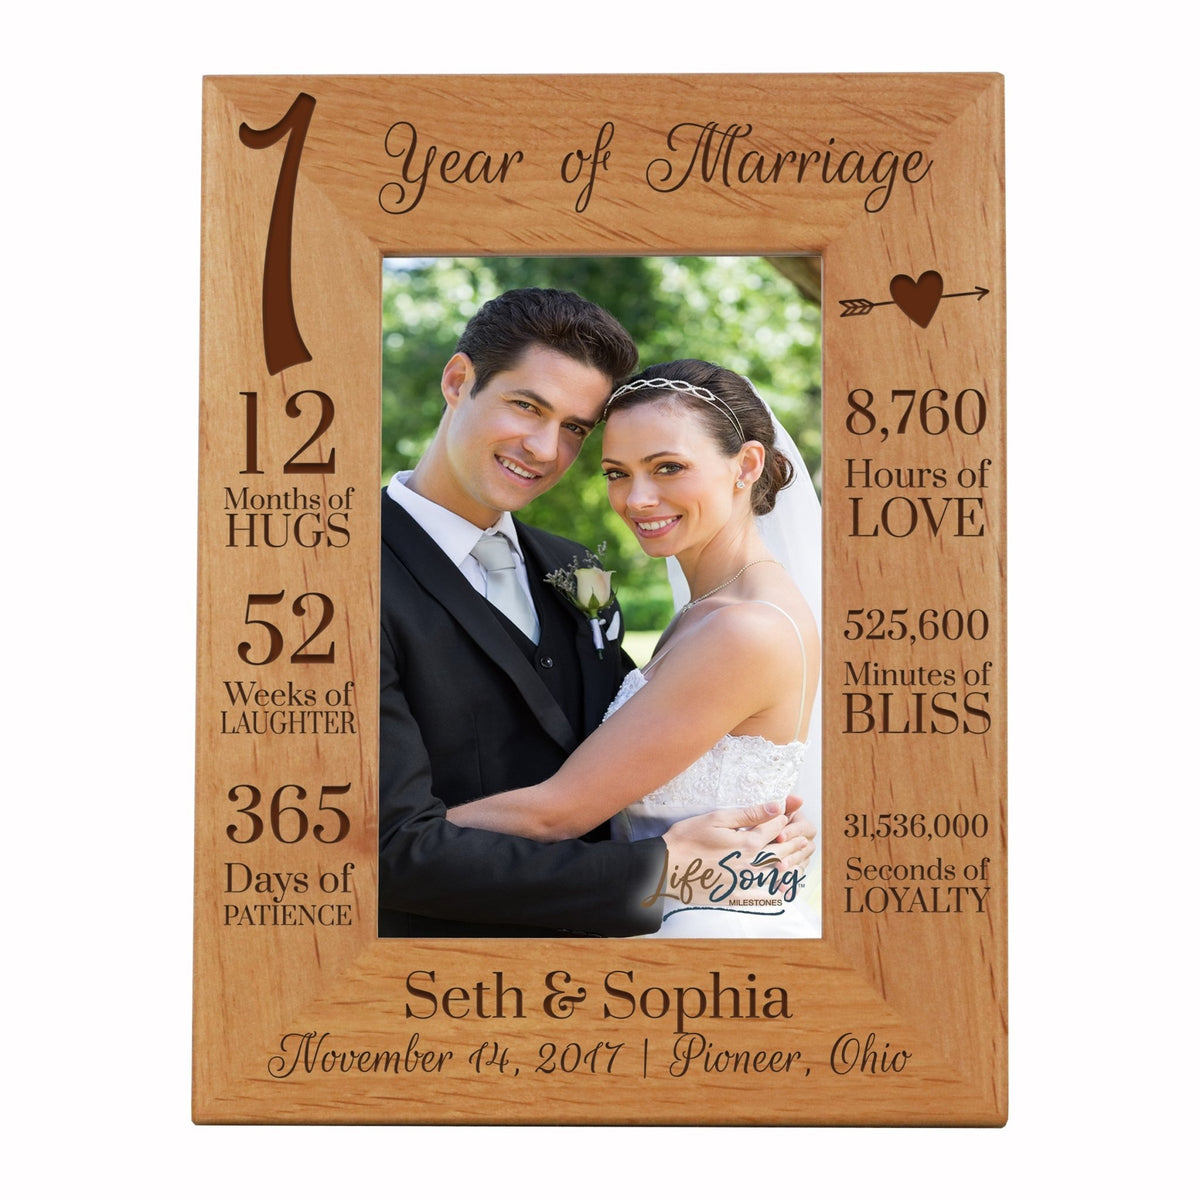 Lifesong Milestones Personalized Engraved 1st Anniversary Photo Frame Gift for Couples